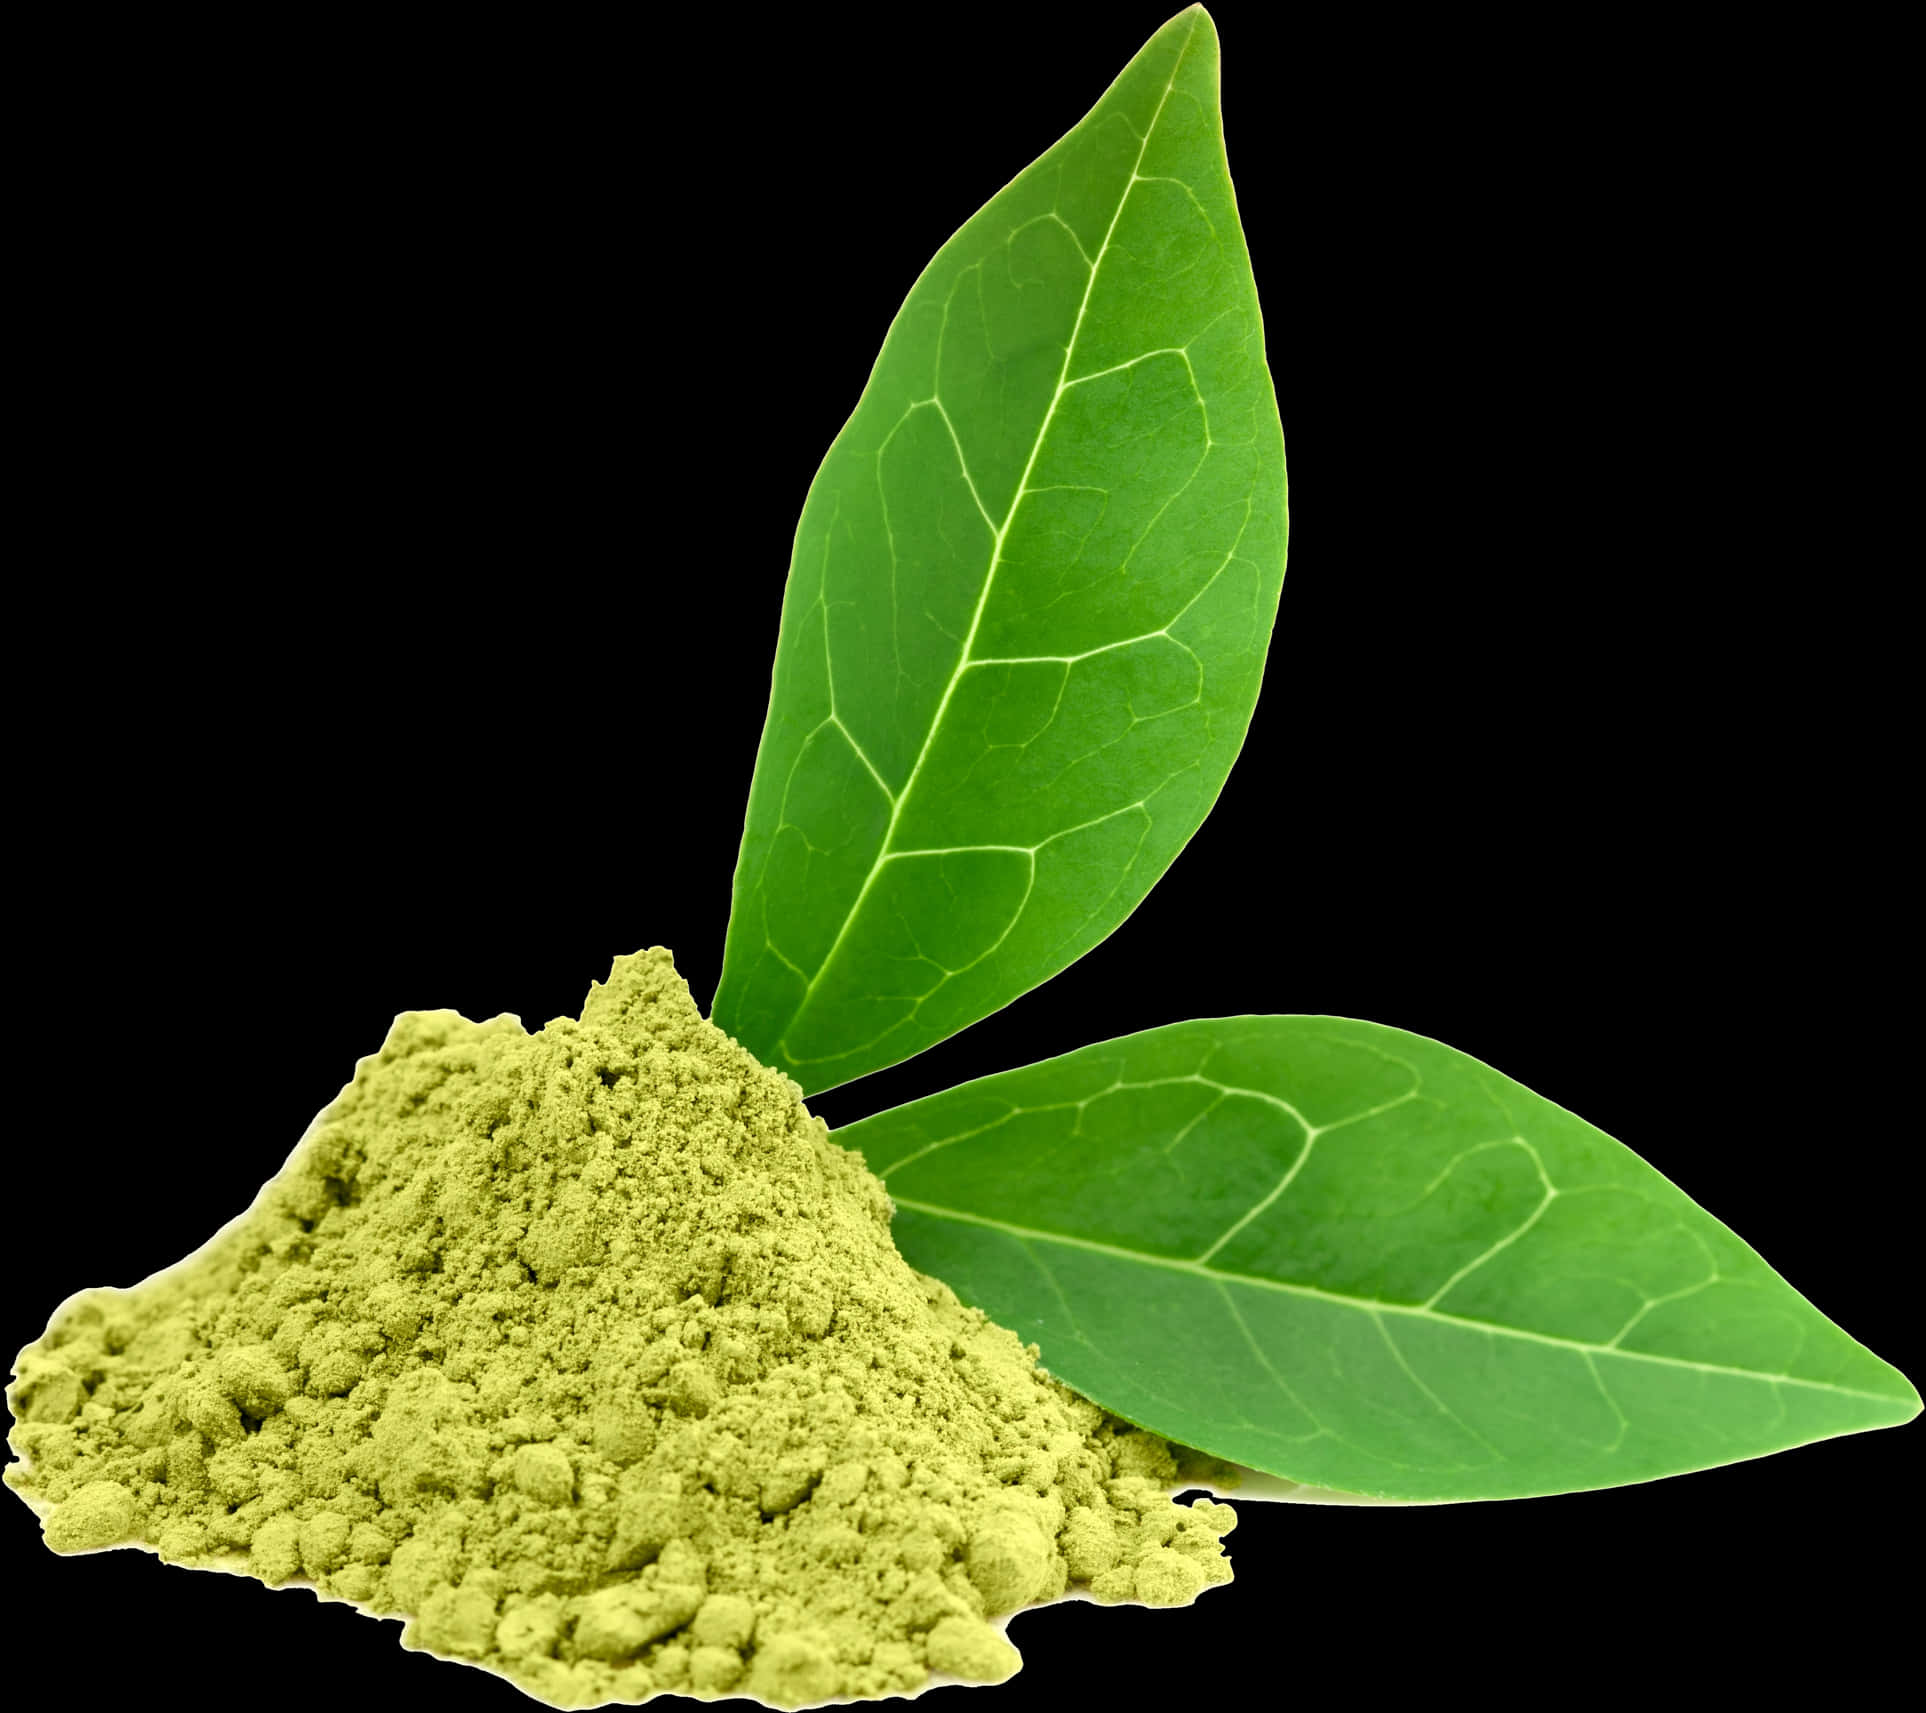 A Pile Of Green Powder With Leaves